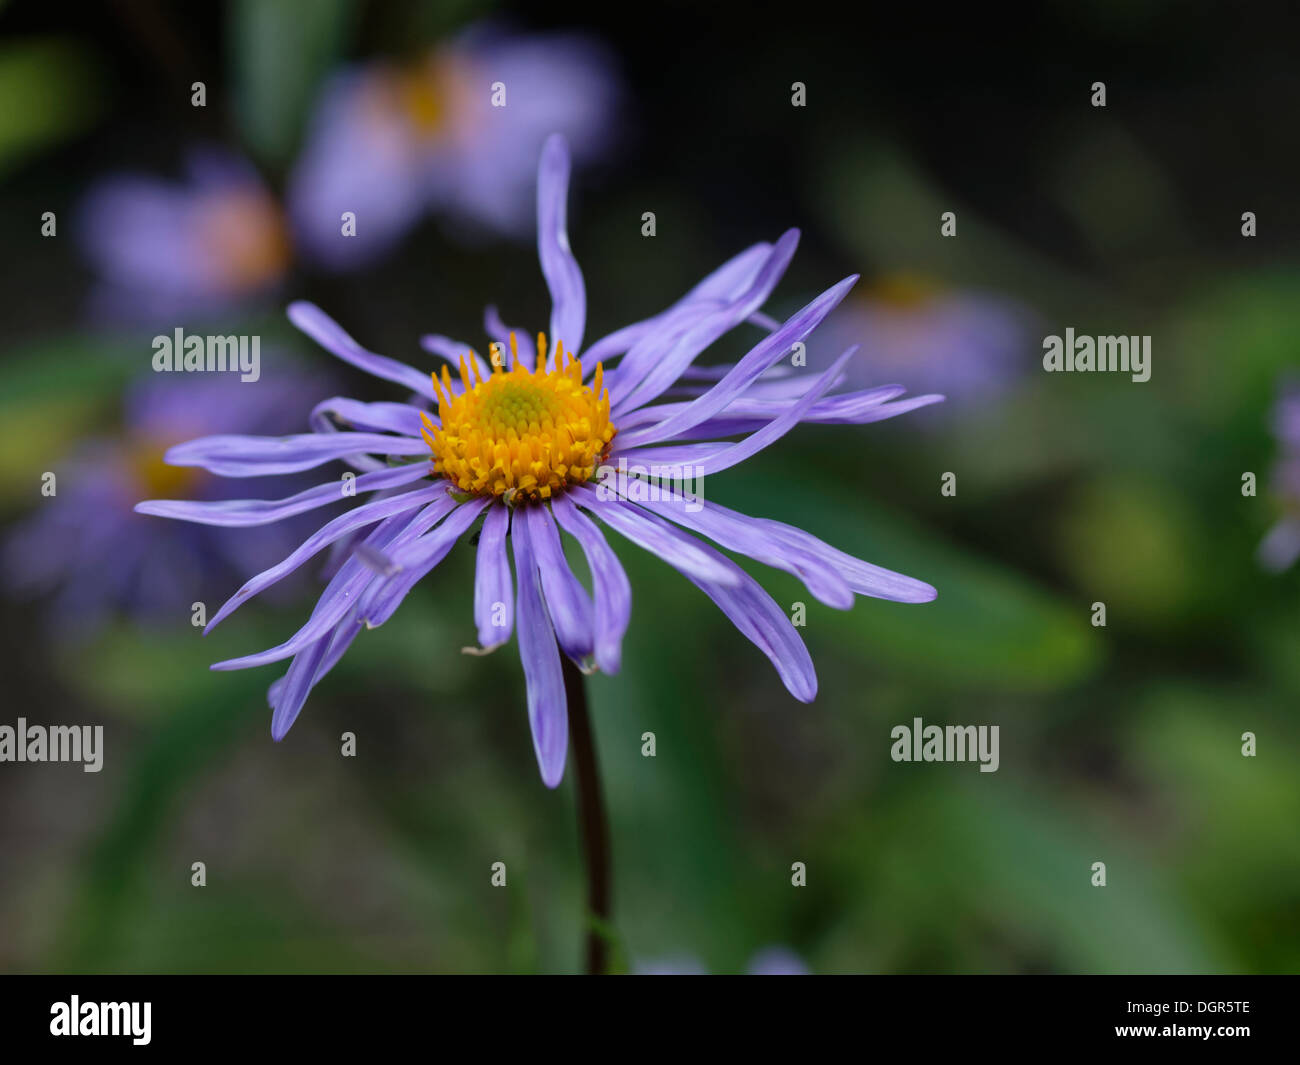 Aster farreri violet flower with yellow disk floret Stock Photo